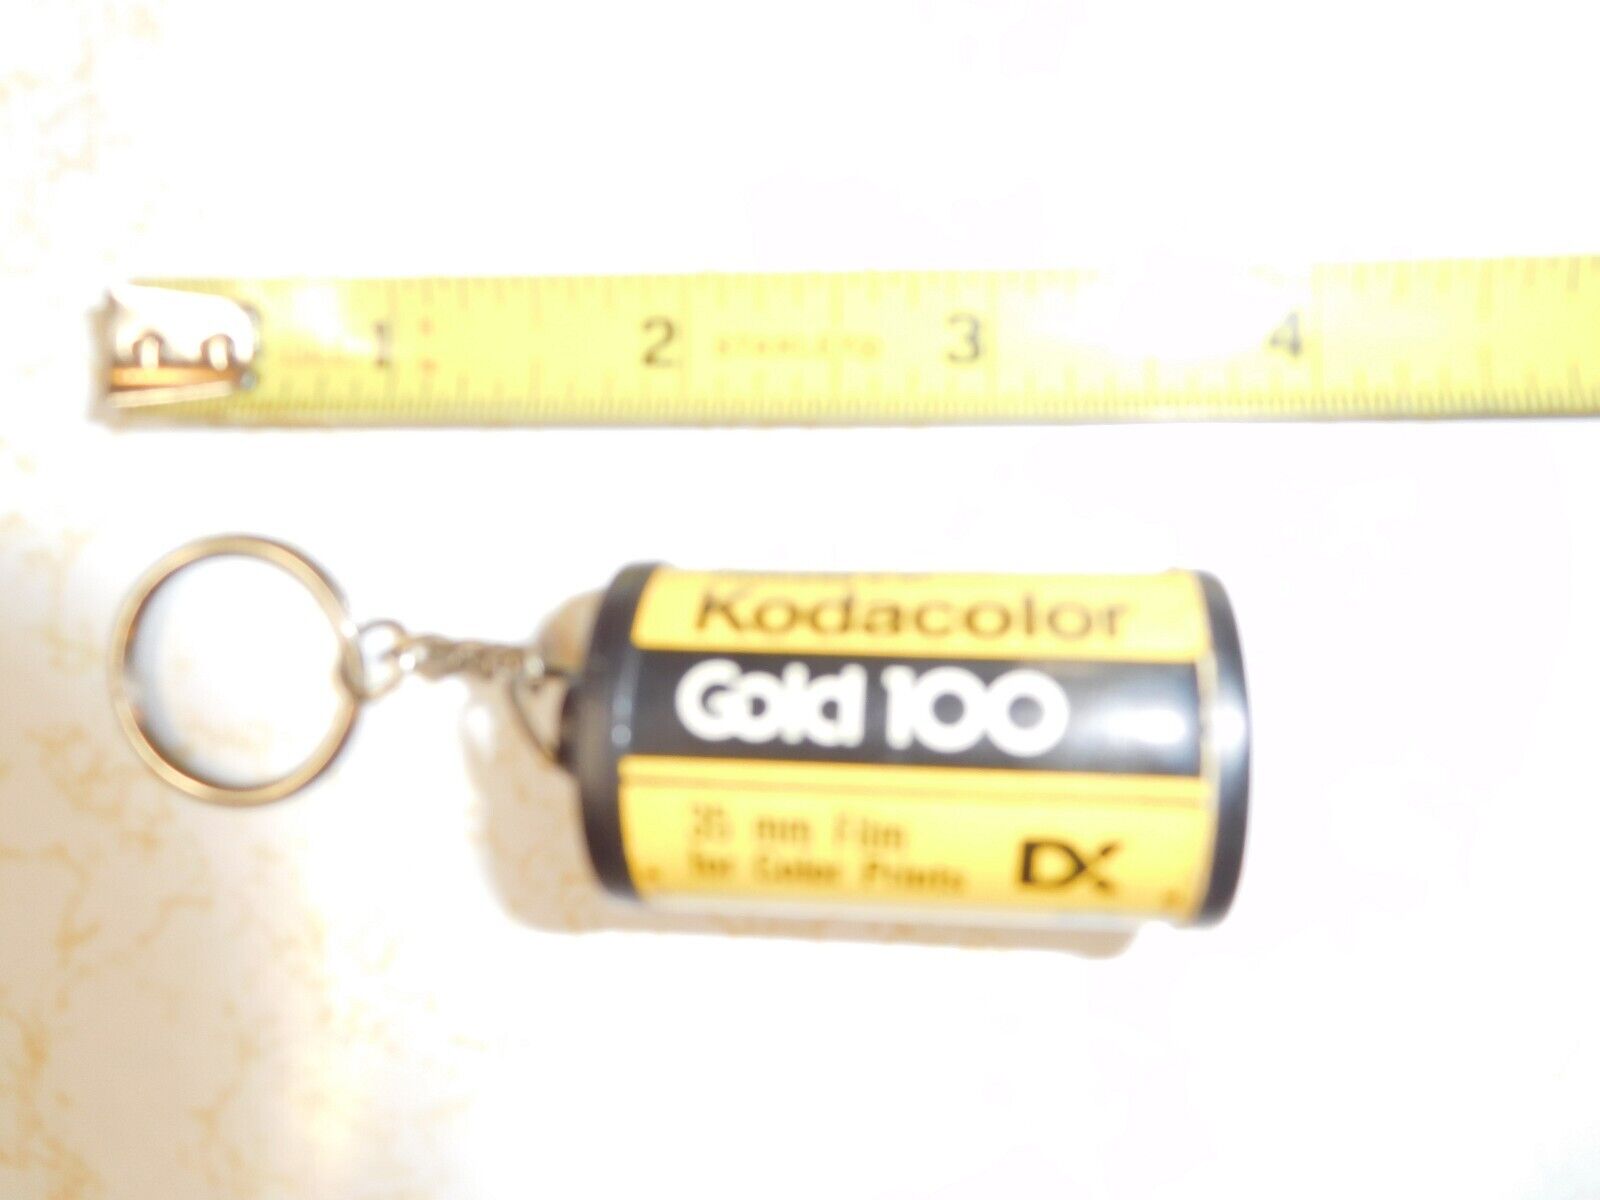 Vintage Kodacolor Gold 100 35 MM Film Roll with Pull Out Note Sheet KeyChain